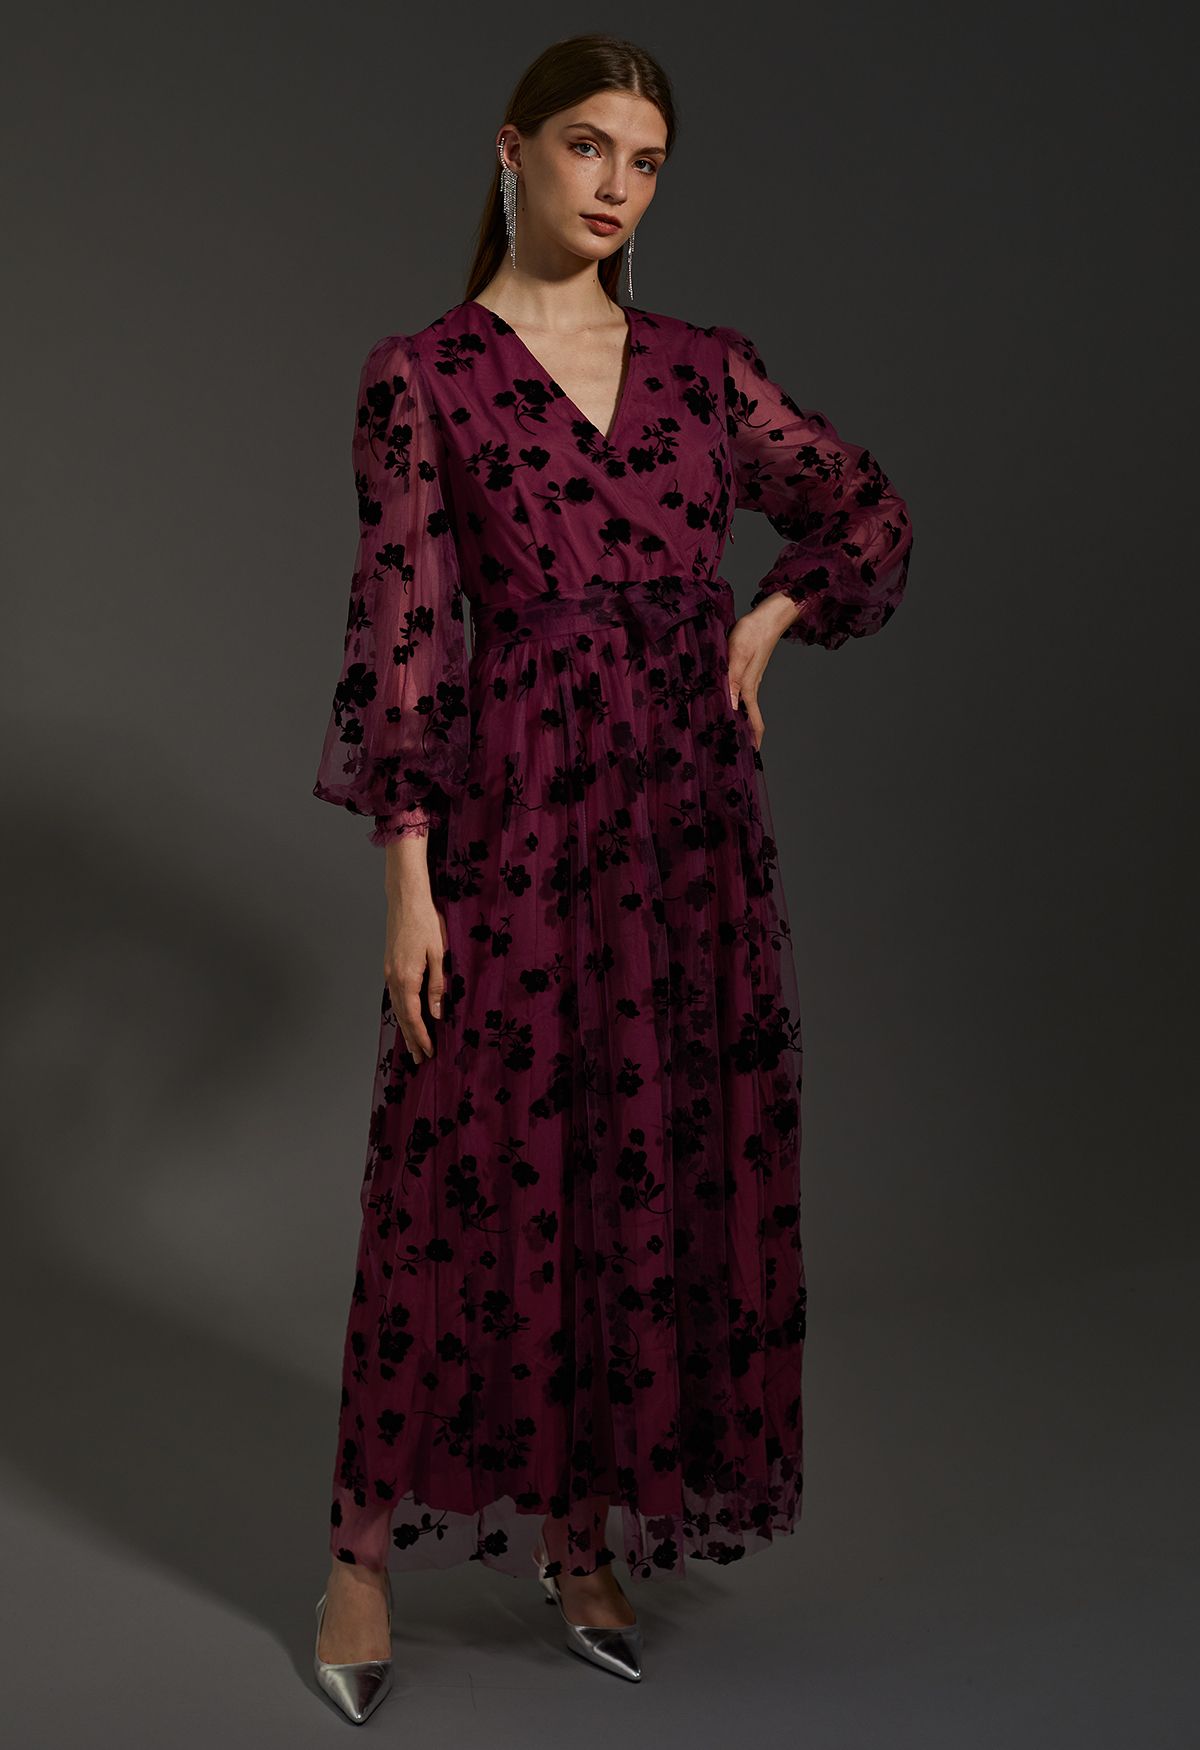 3D Posy Mesh Wrap Maxi Dress in Burgundy - Retro, Indie and Unique Fashion